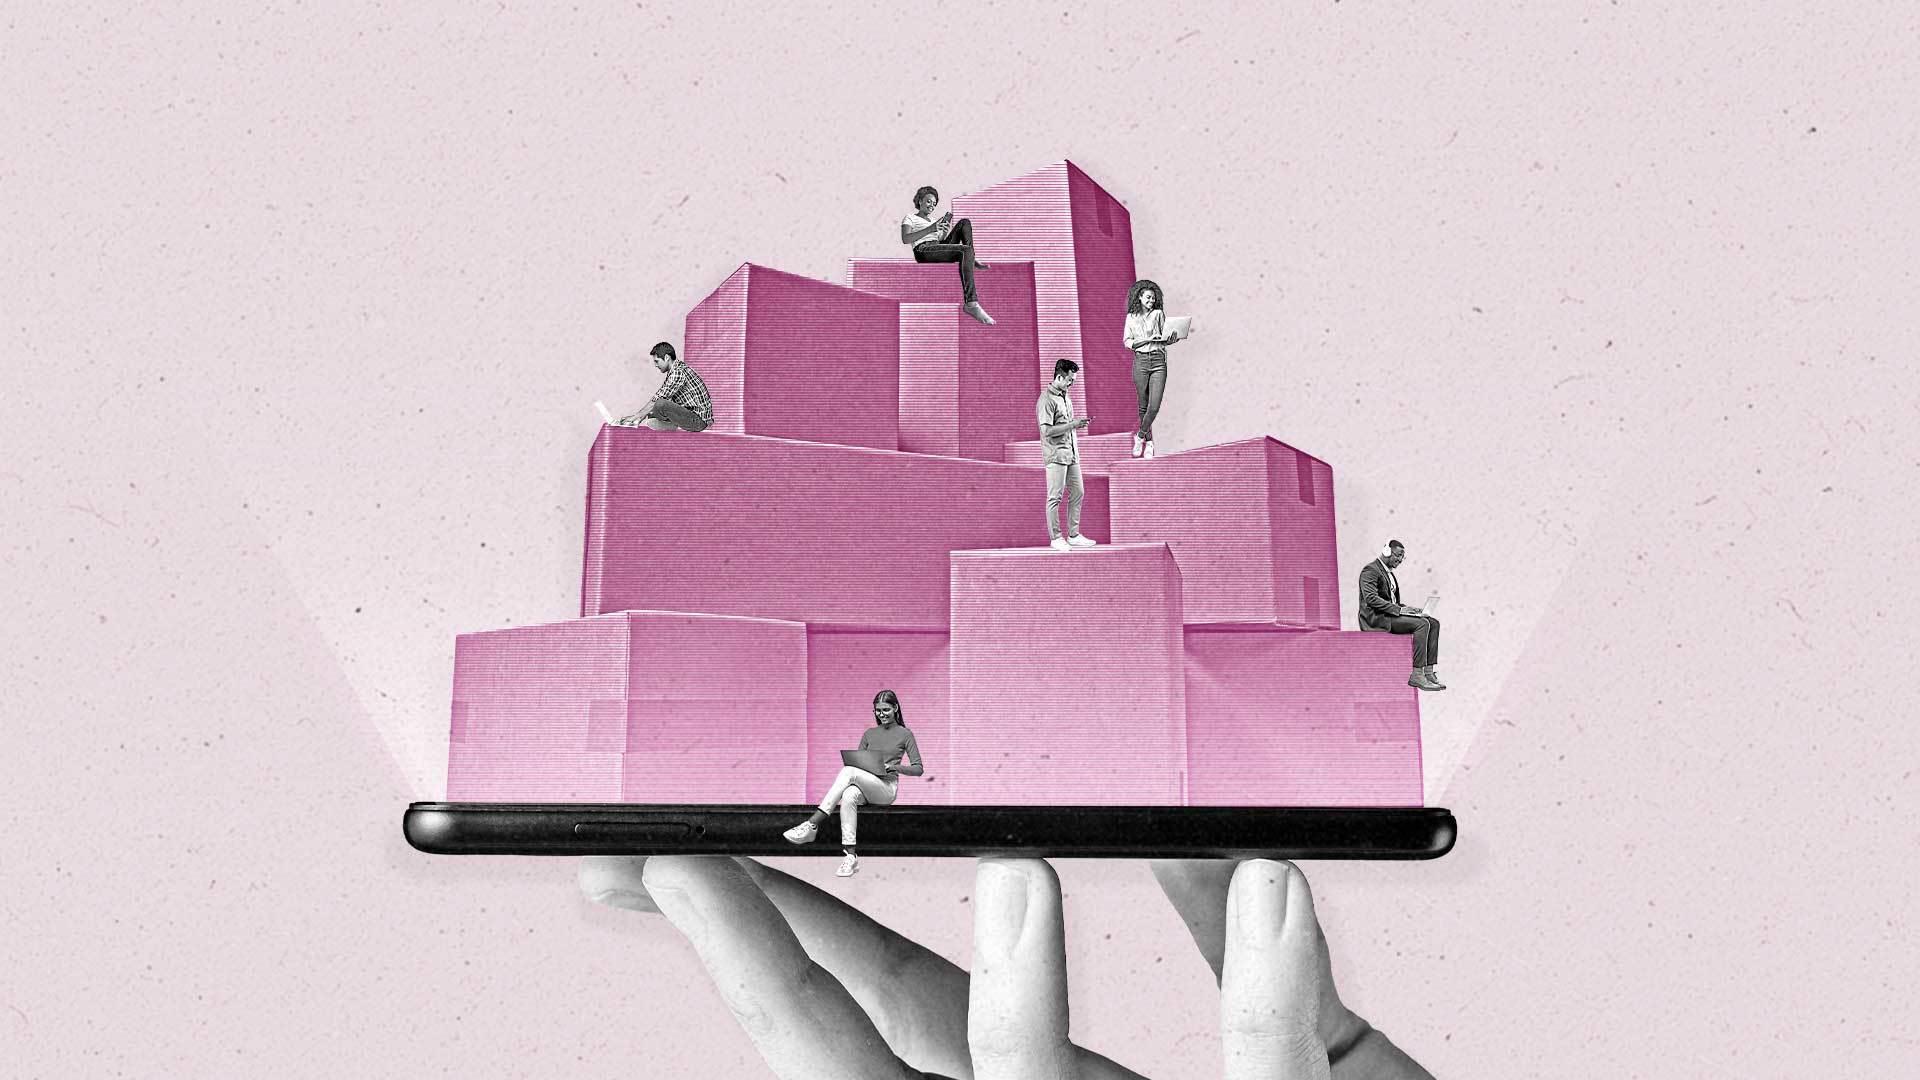 A hand holds a smartphone balancing stacks of boxes with millennials interacting with laptops and smartphones.